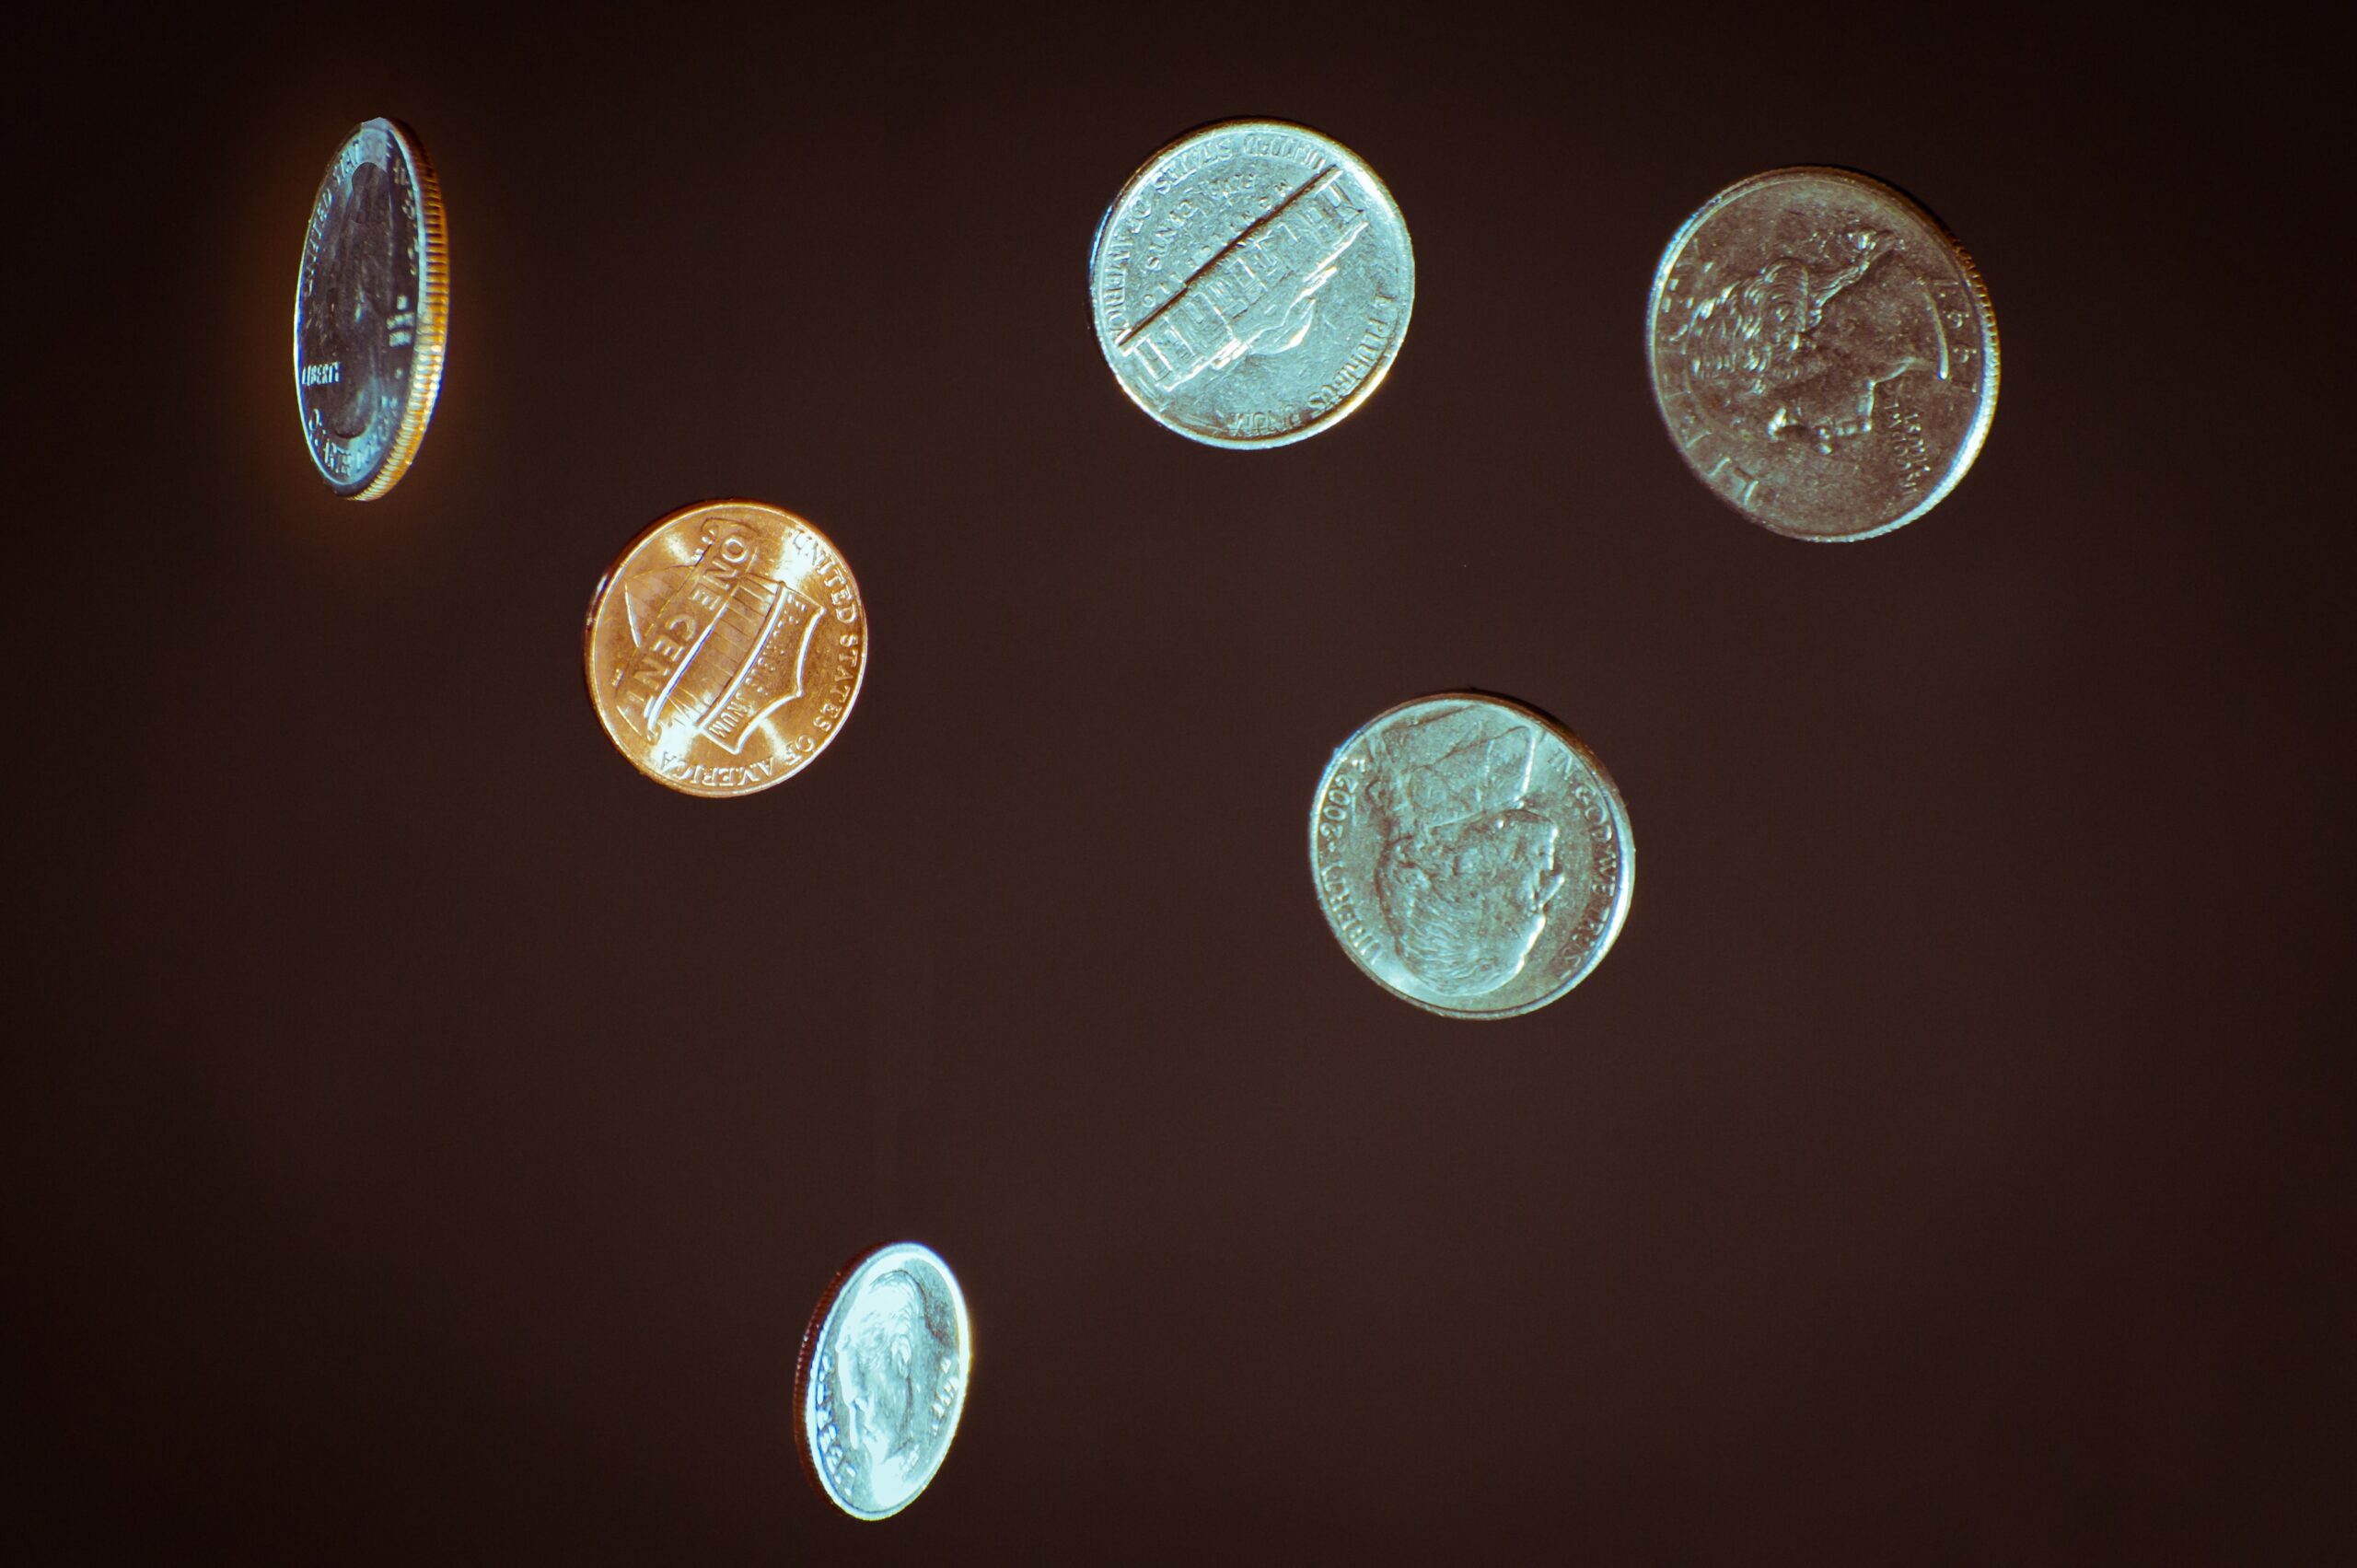 Photo of American Coins Falling